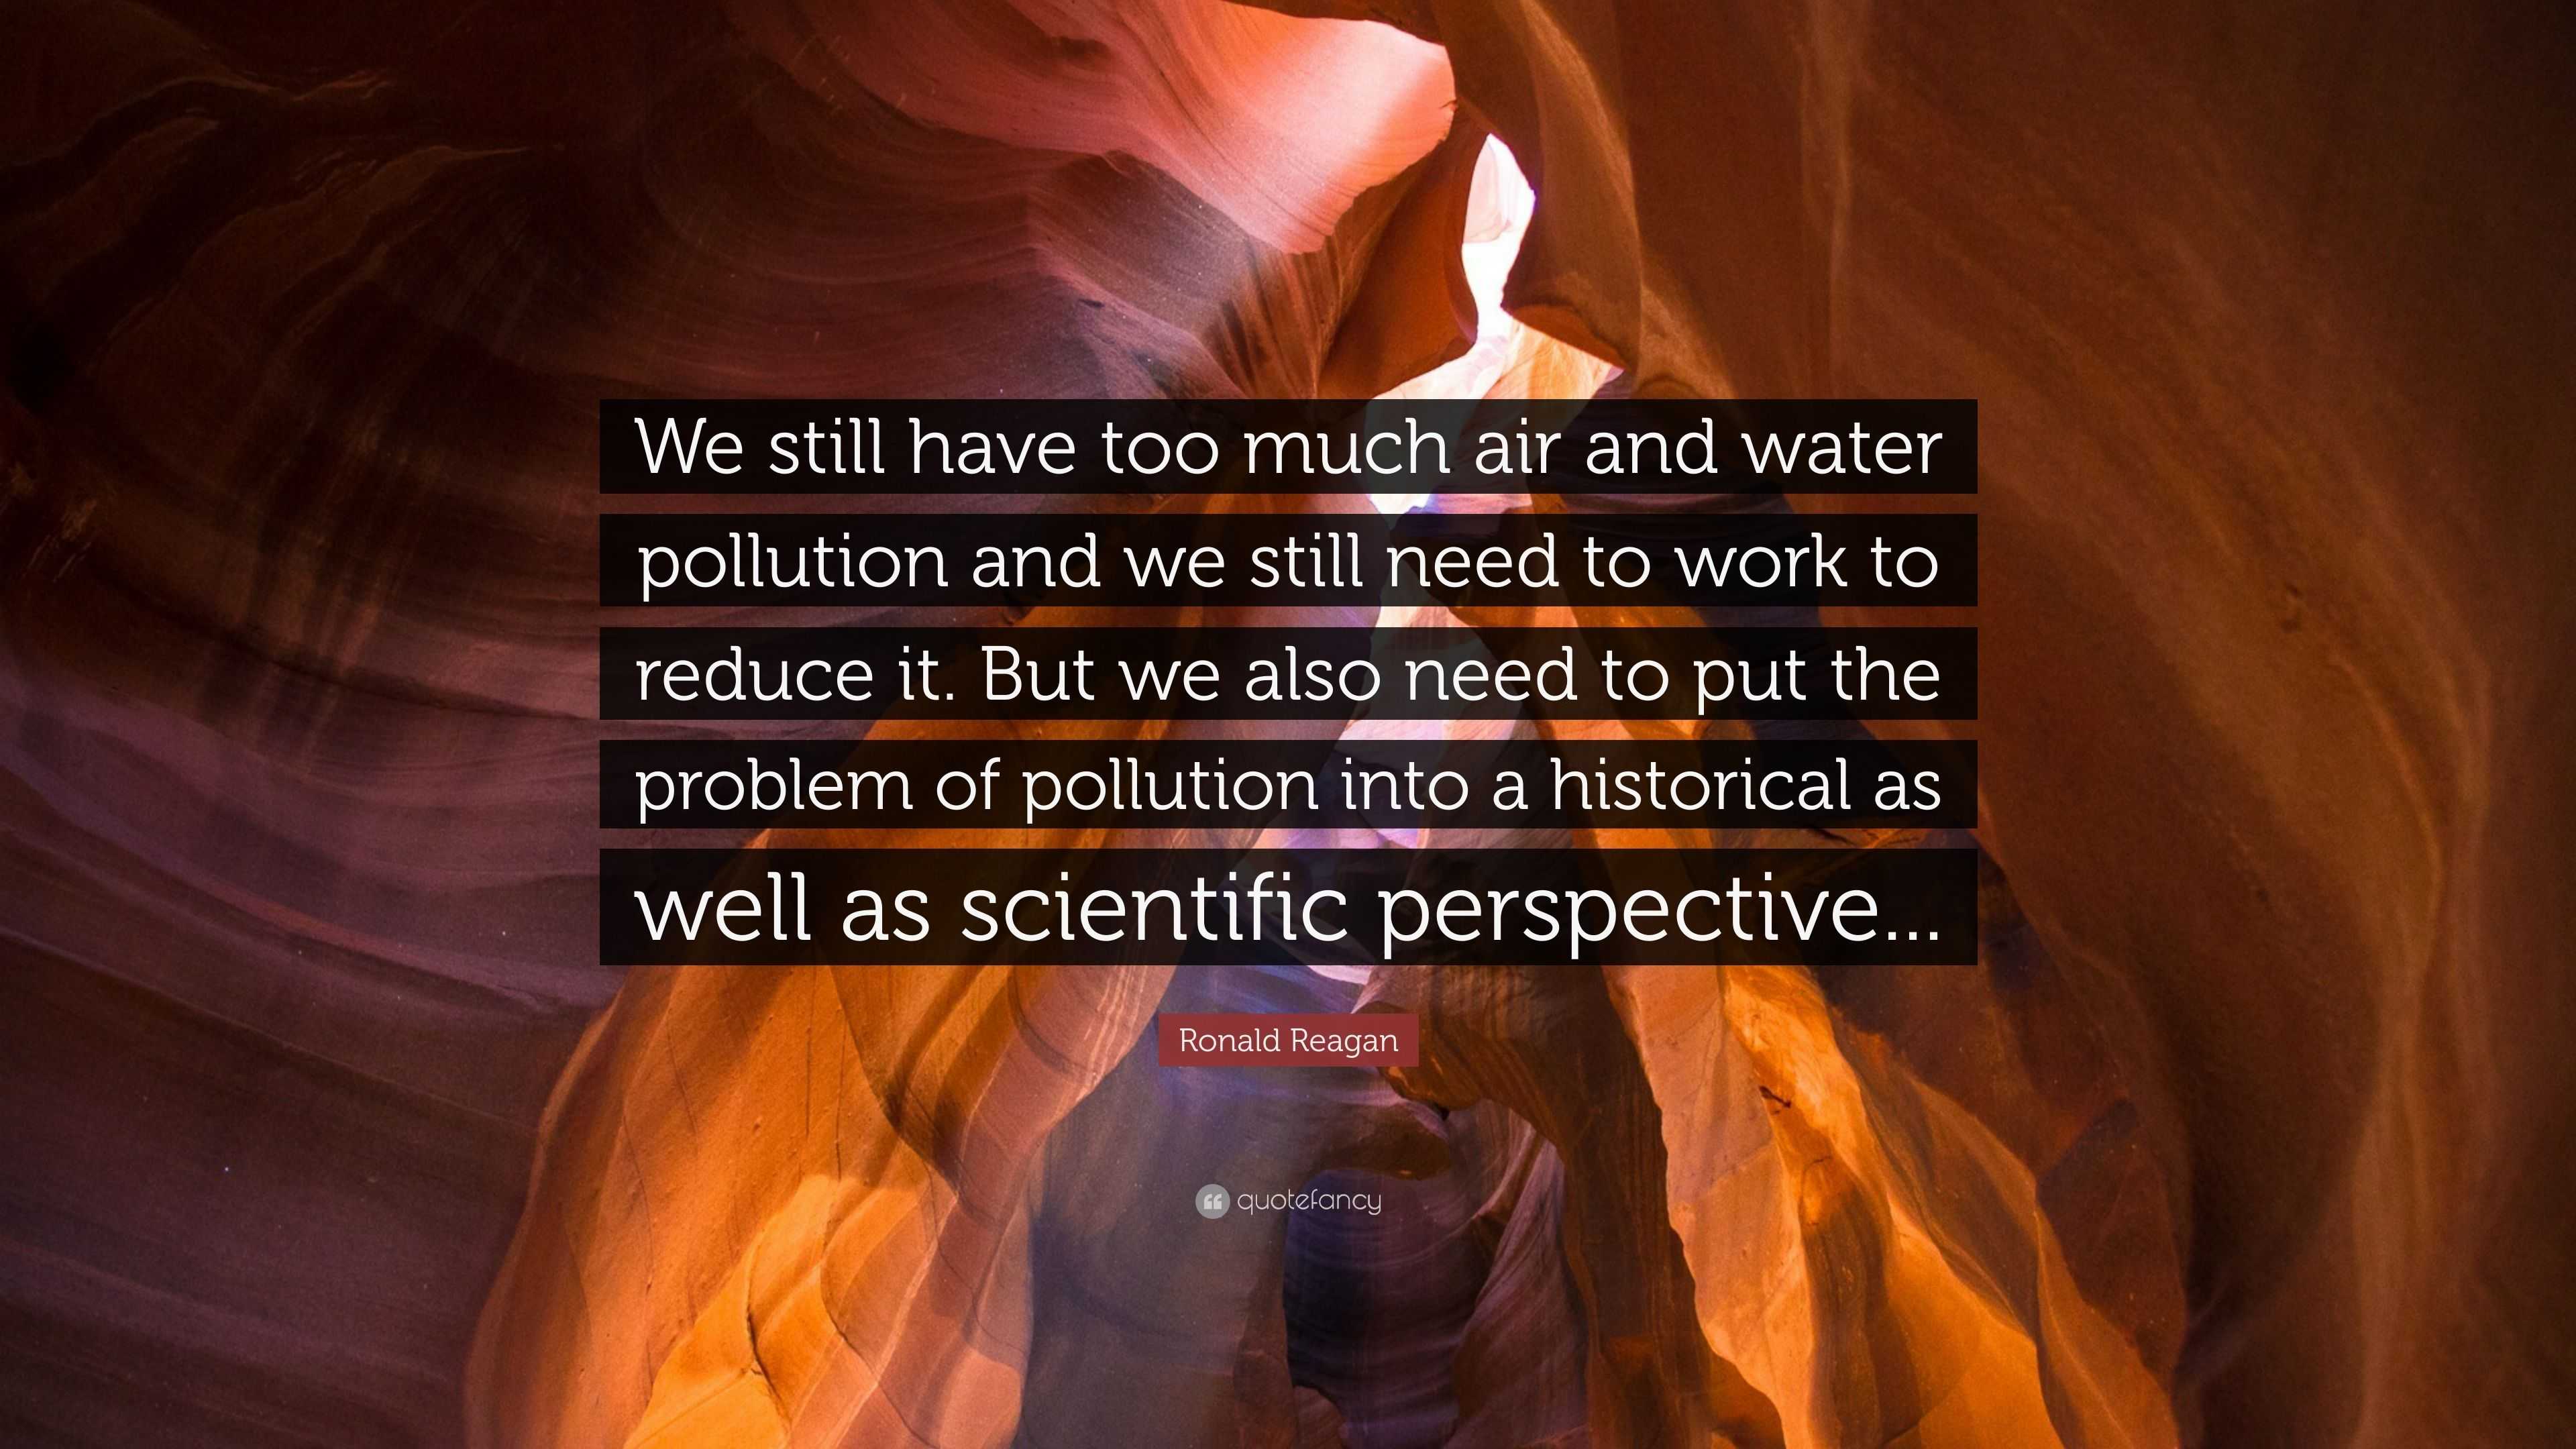 Ronald Reagan Quote: "We still have too much air and water pollution and we still need to work ...